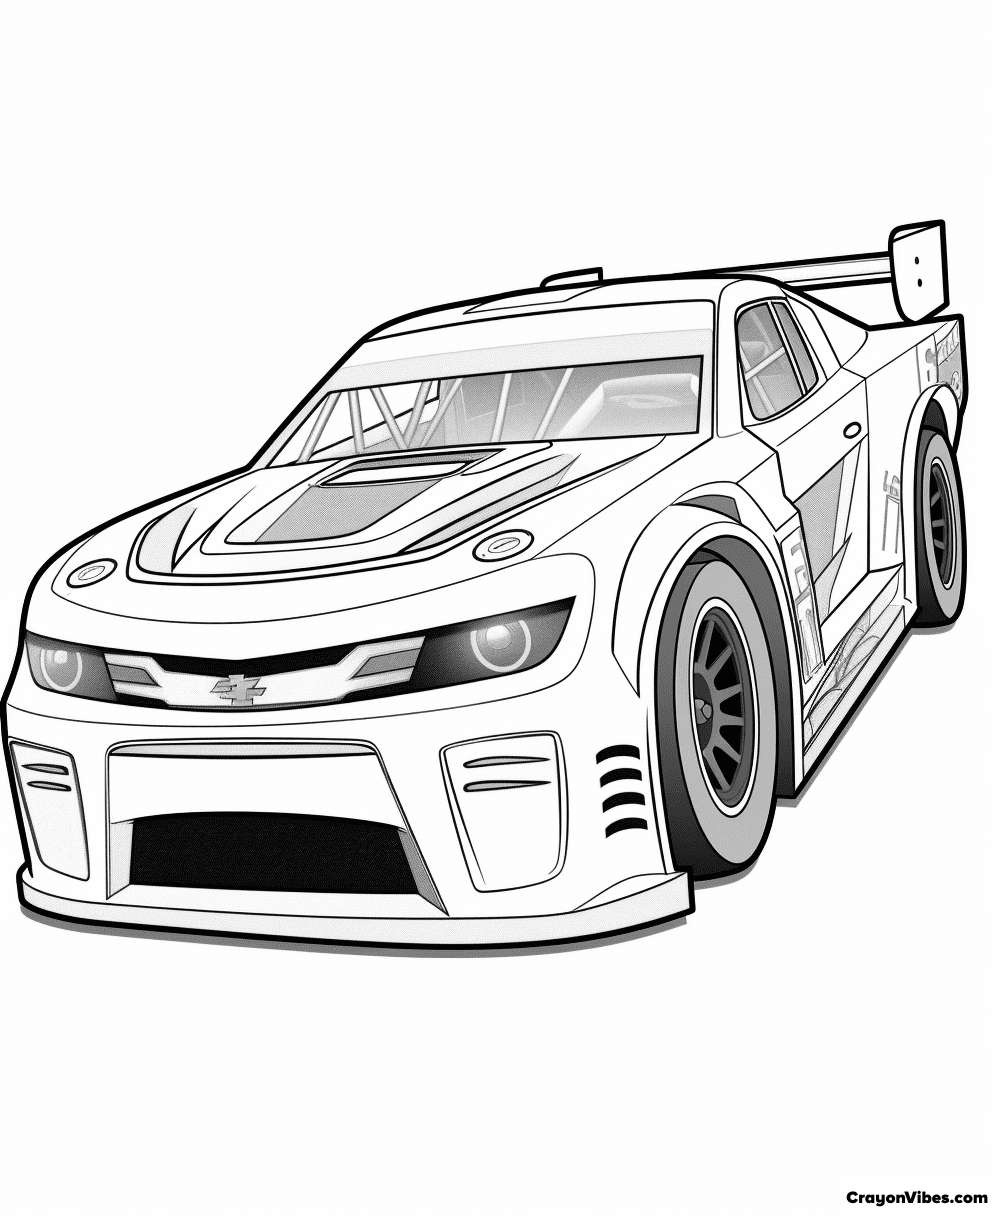 Nascar coloring pages free printables for kids and adults